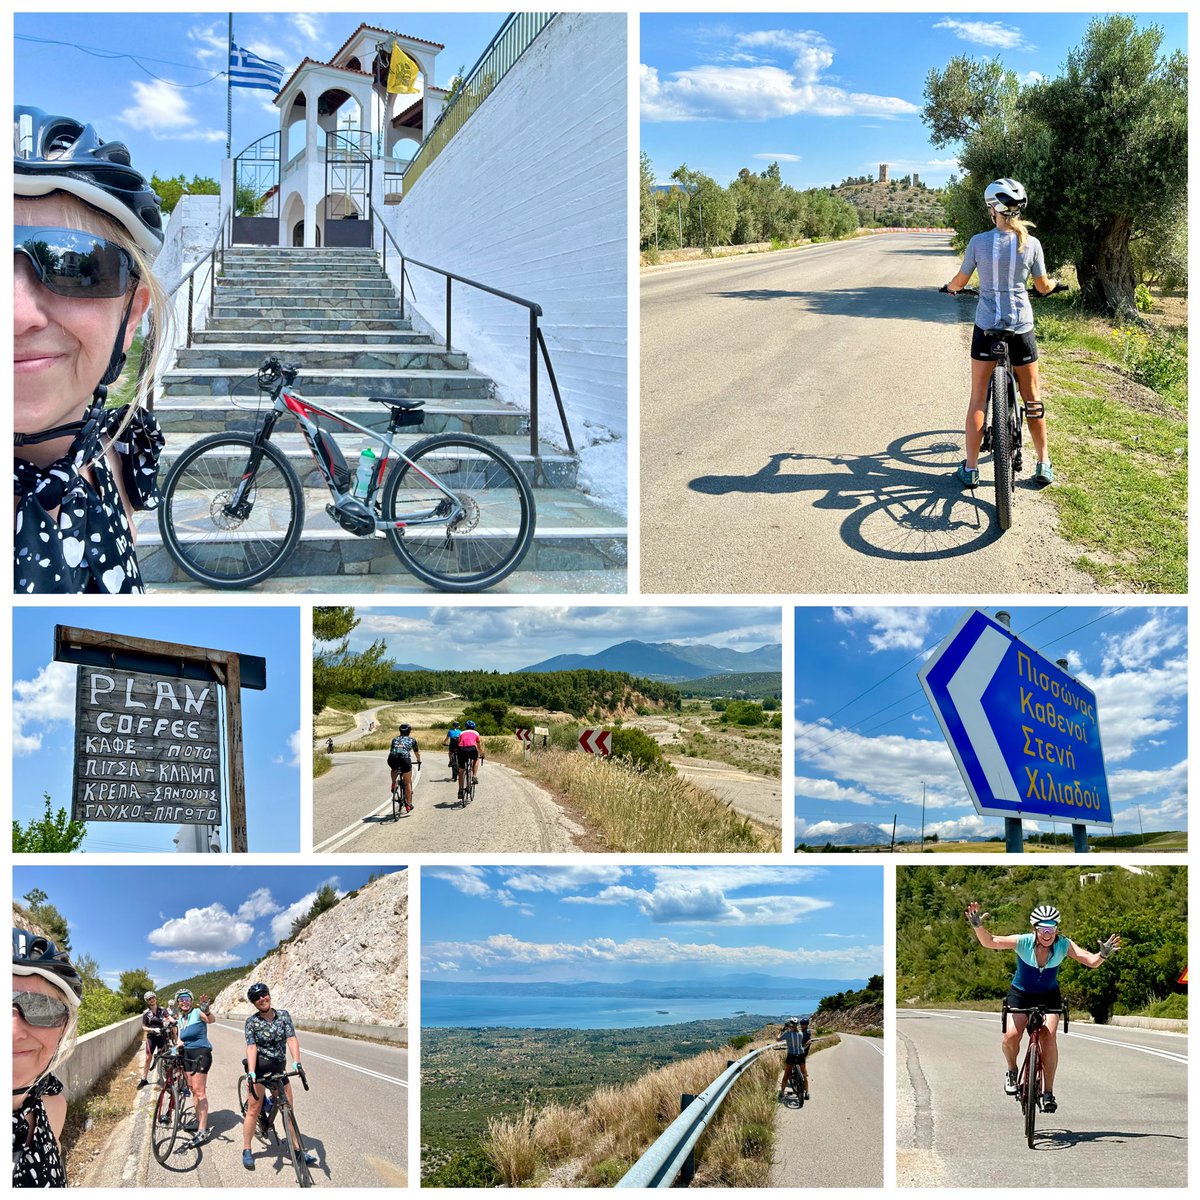 Hills, heat, goats, views, stunning descent down to the sea and the @rafredarrows flying above as we cycled below. Day 2 in #Greece was a good one! ☀️🚴‍♀️🇬🇷